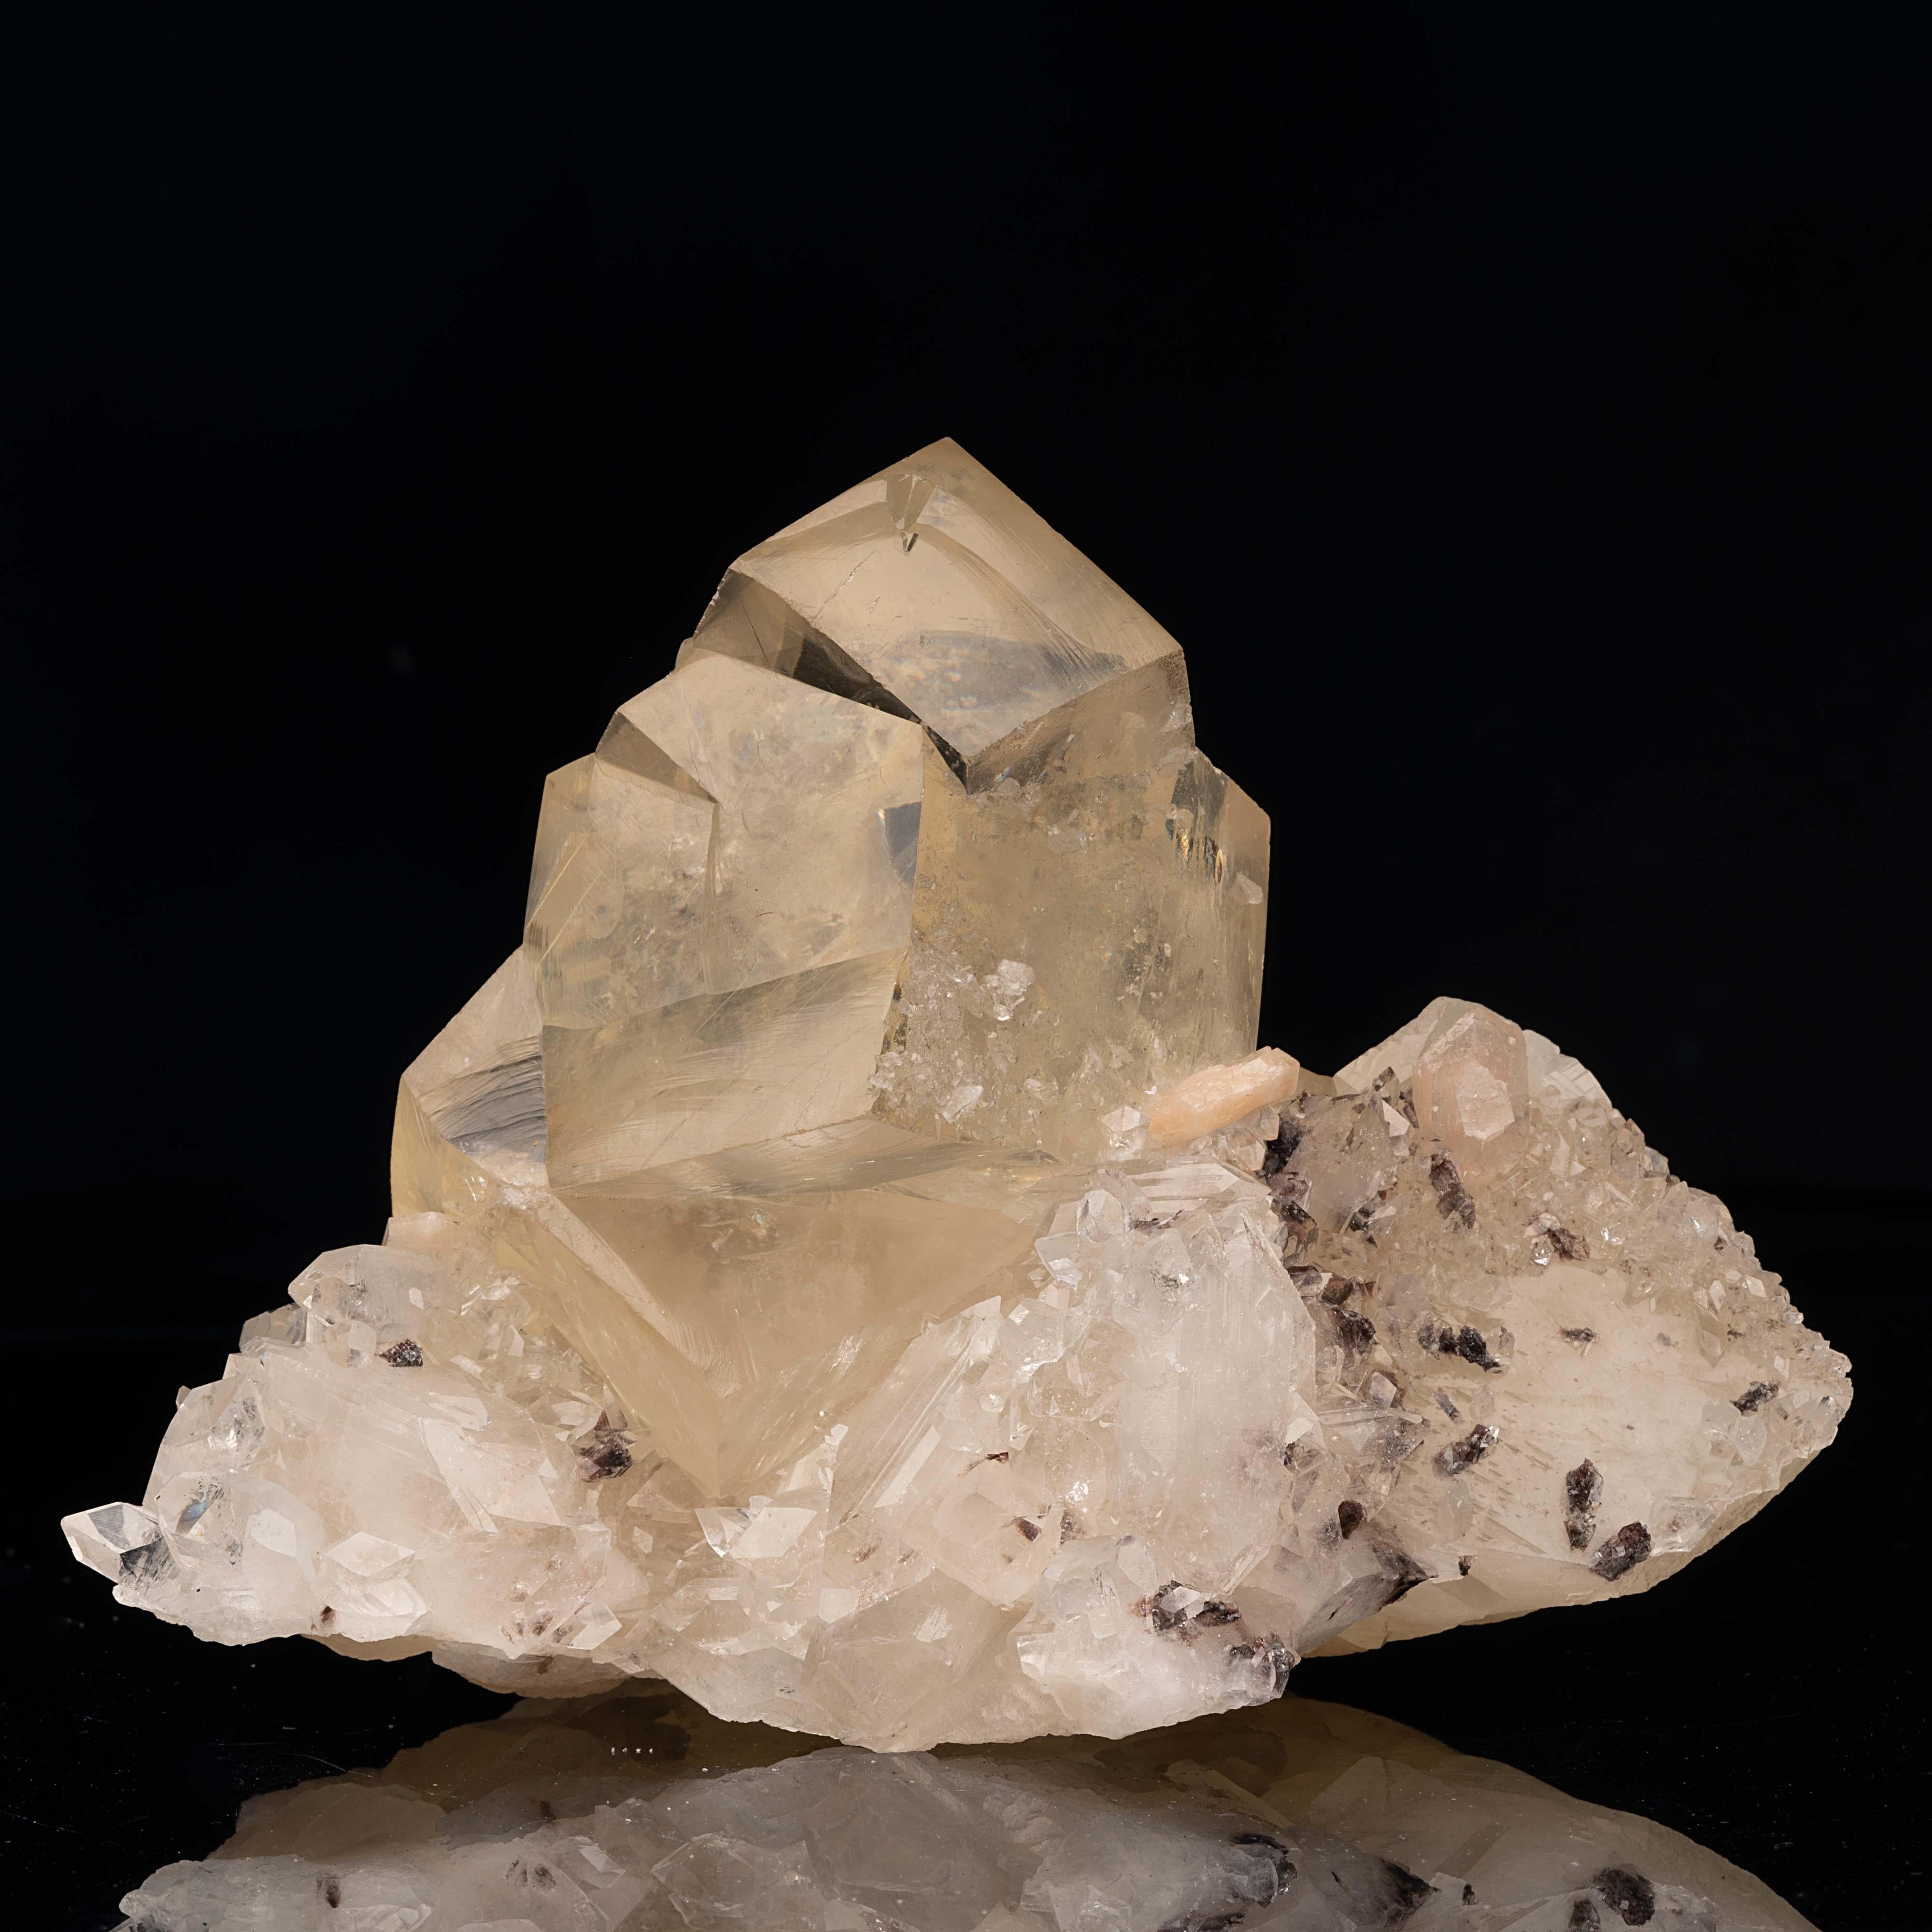 This true display specimen with fantastic aesthetics features two large cubic golden calcite crystals twinning into each other, with one appearing the engulf the other. The luster and especially the clarity of this calcite specimen is unparalleled.